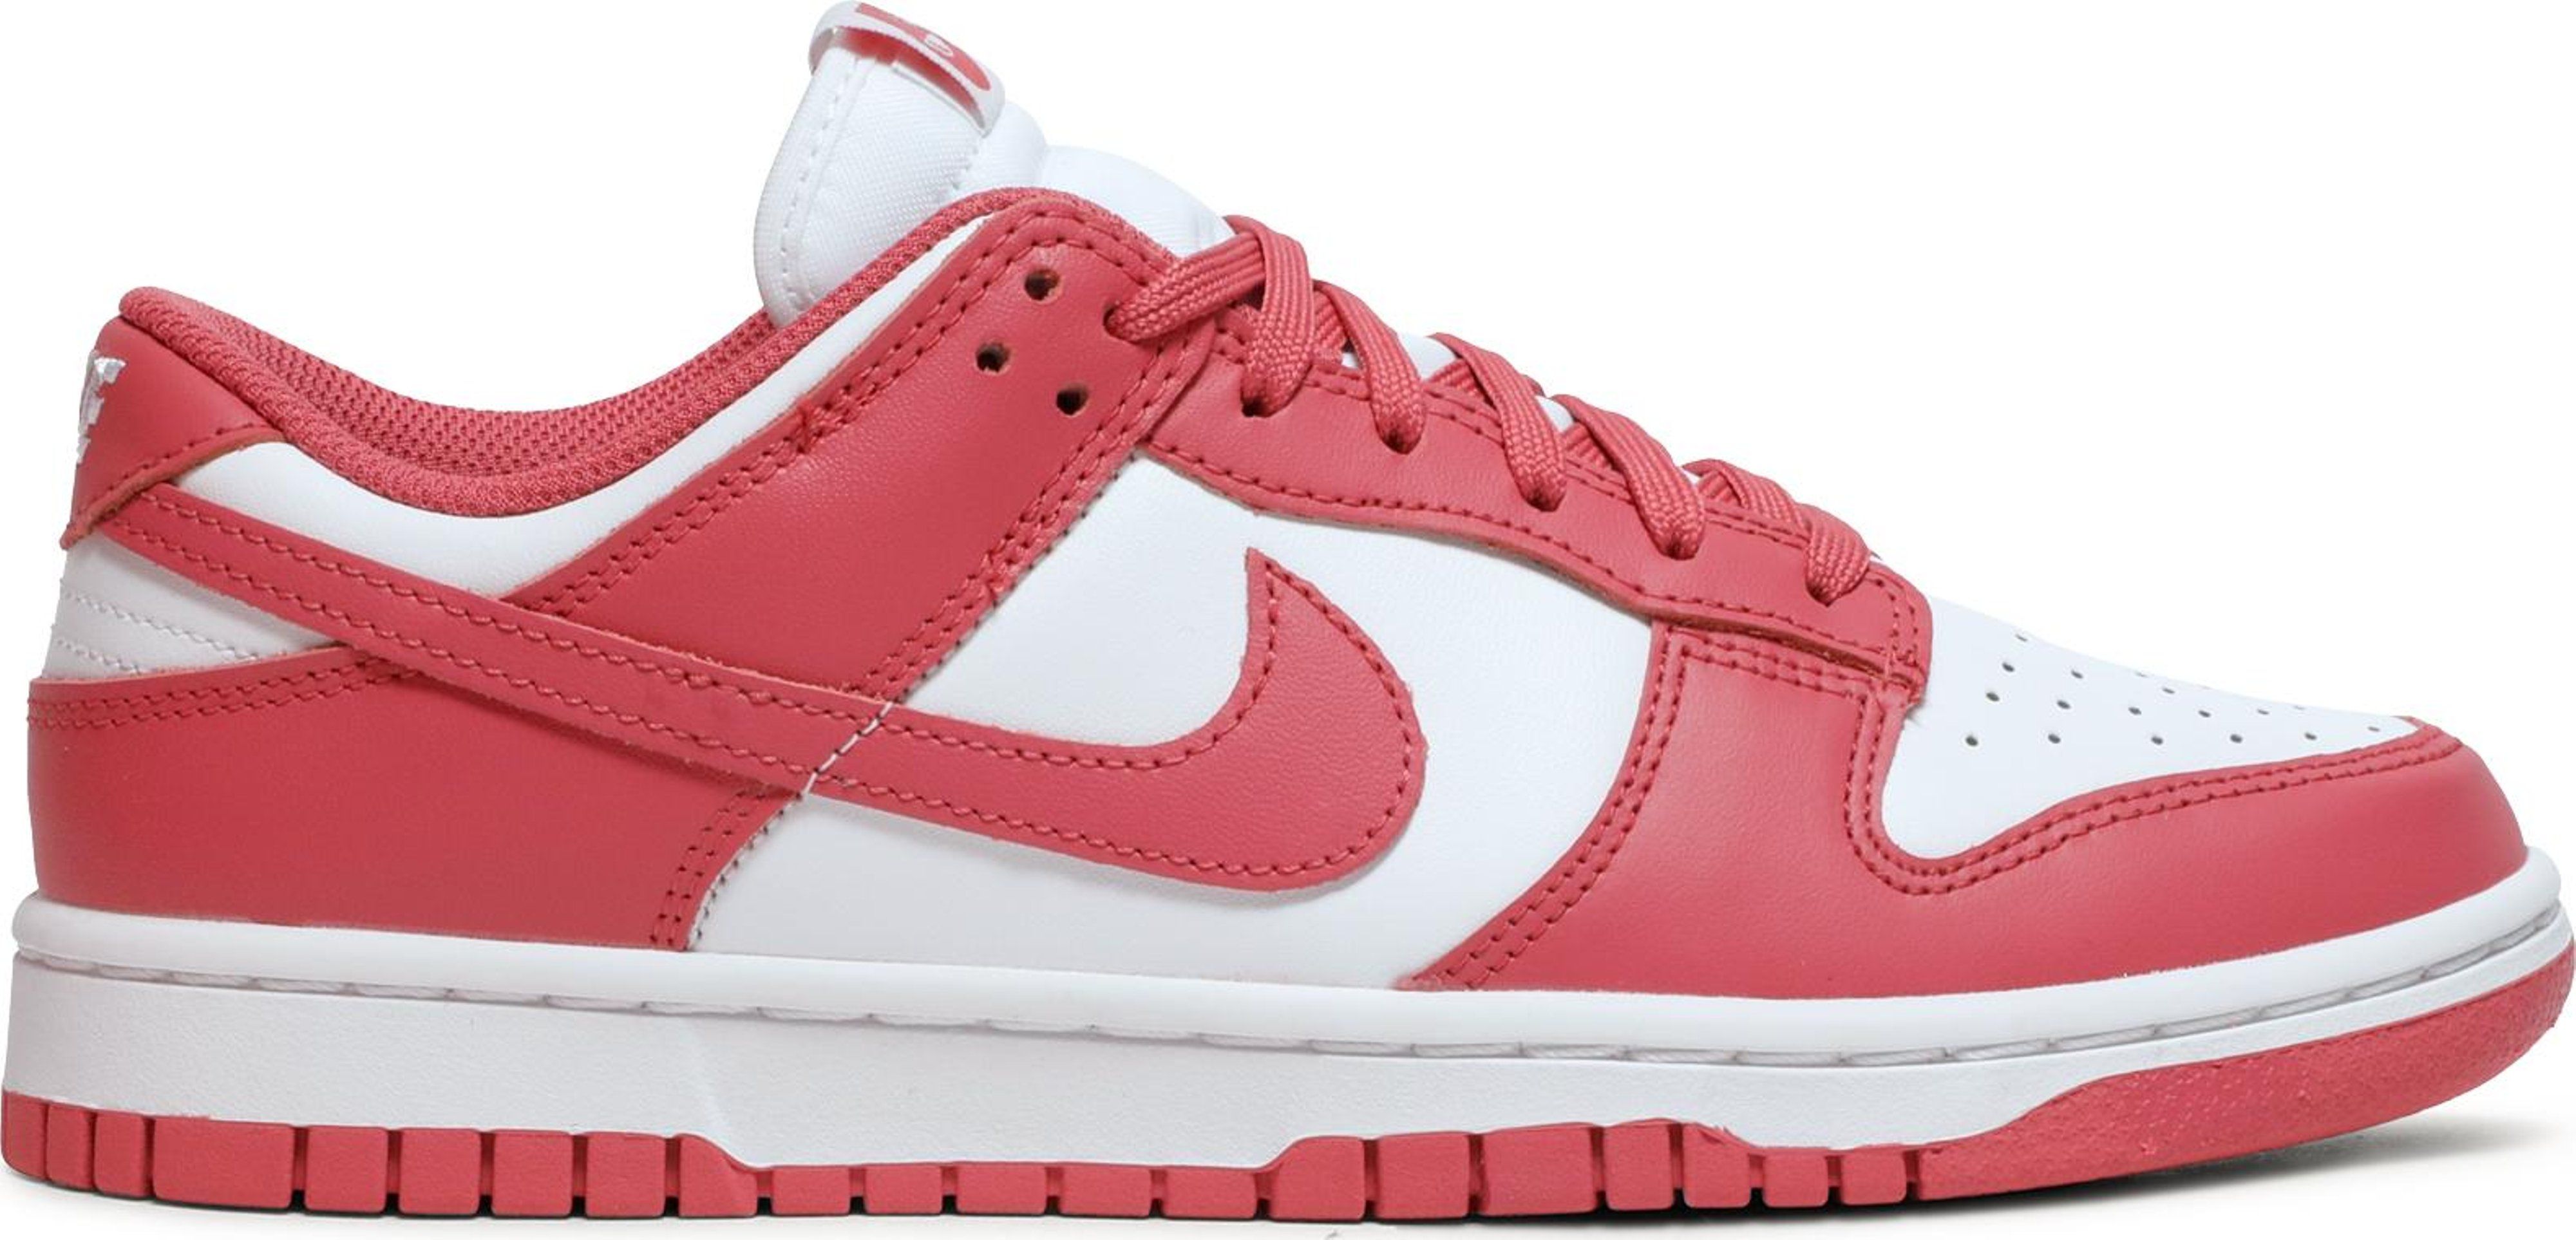 Wmns Dunk Low 'Archeo Pink' | GOAT